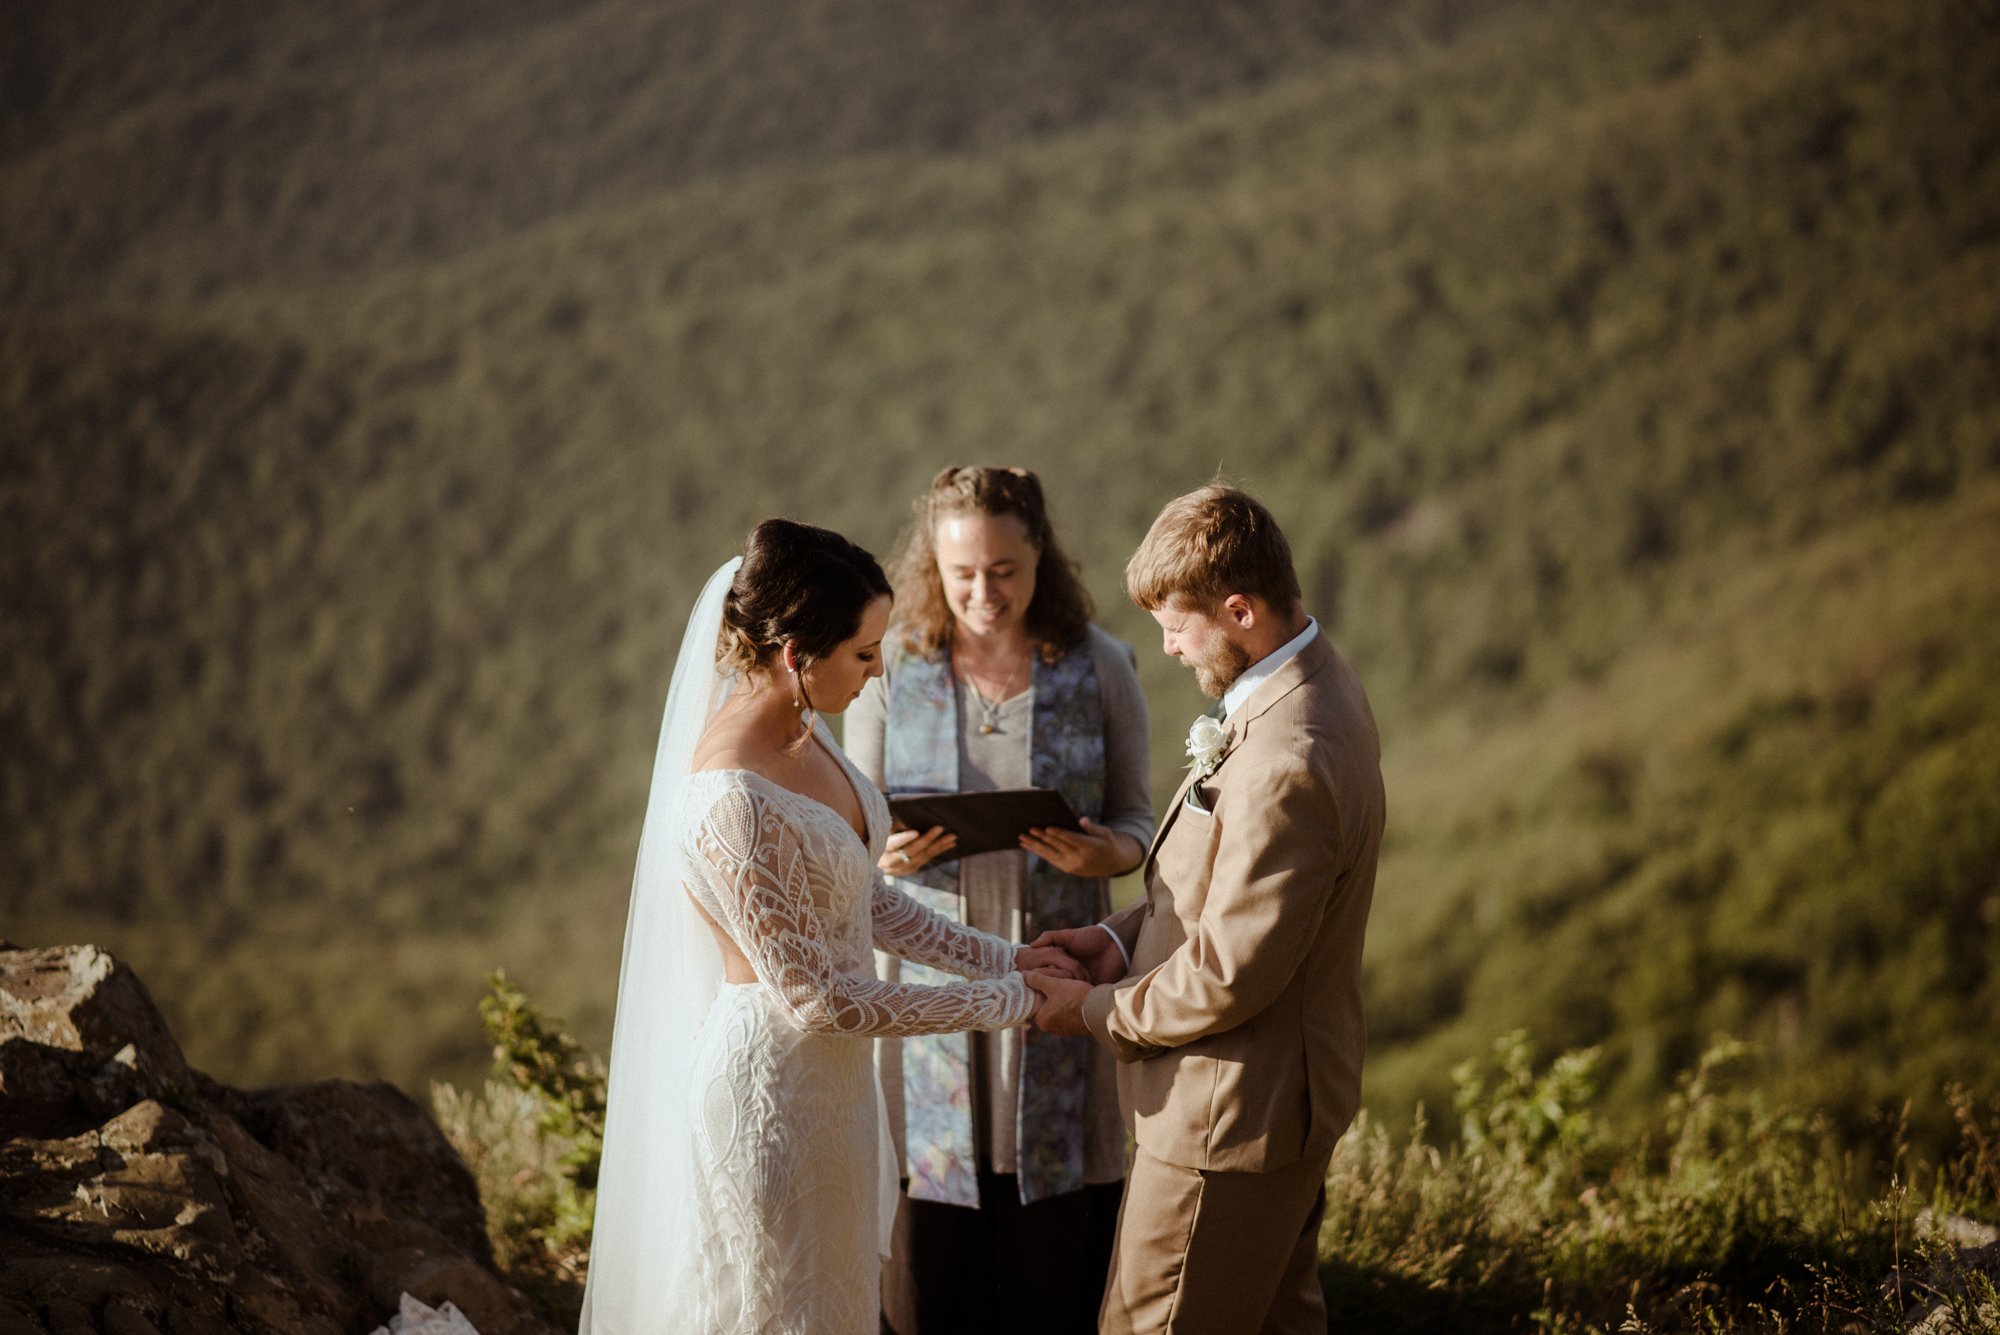 Sunset Elopement on Stony Man Summit in Shenandoah National Park - White Sails Creative Elopement Photography - July Elopement on the Blue Ridge Parkway_22.jpg